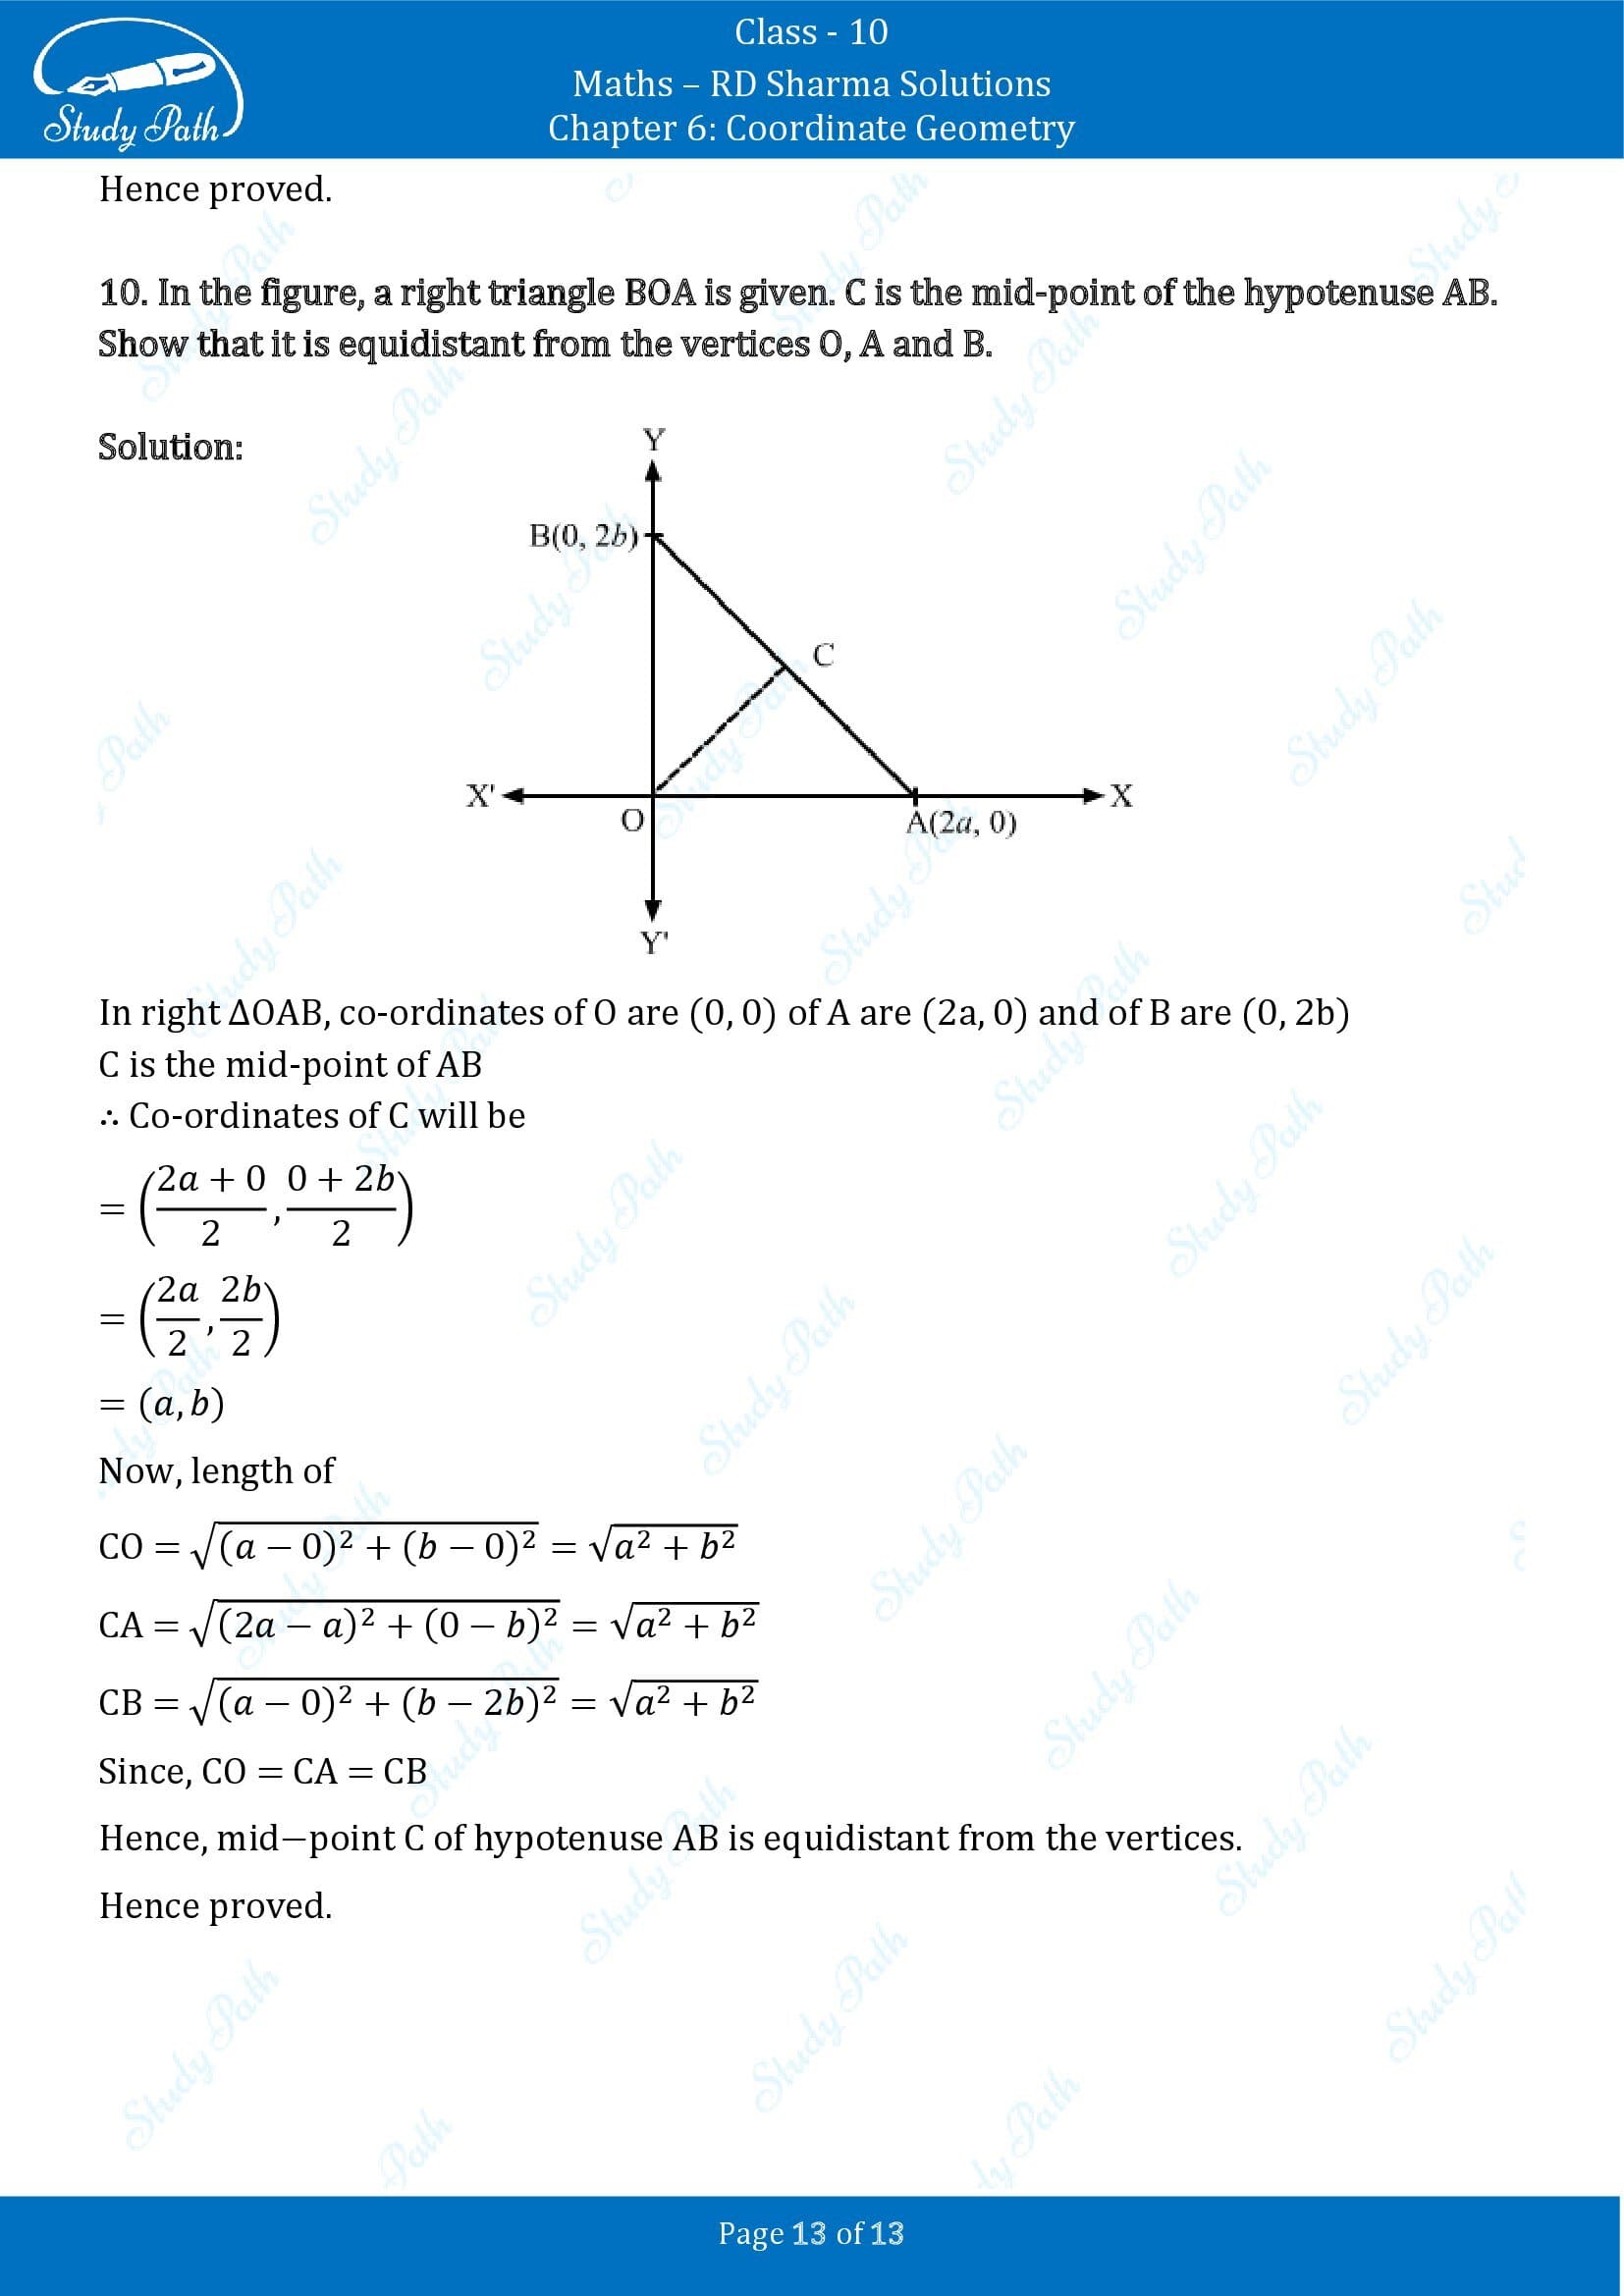 RD Sharma Solutions Class 10 Chapter 6 Coordinate Geometry Exercise 6.4 00013